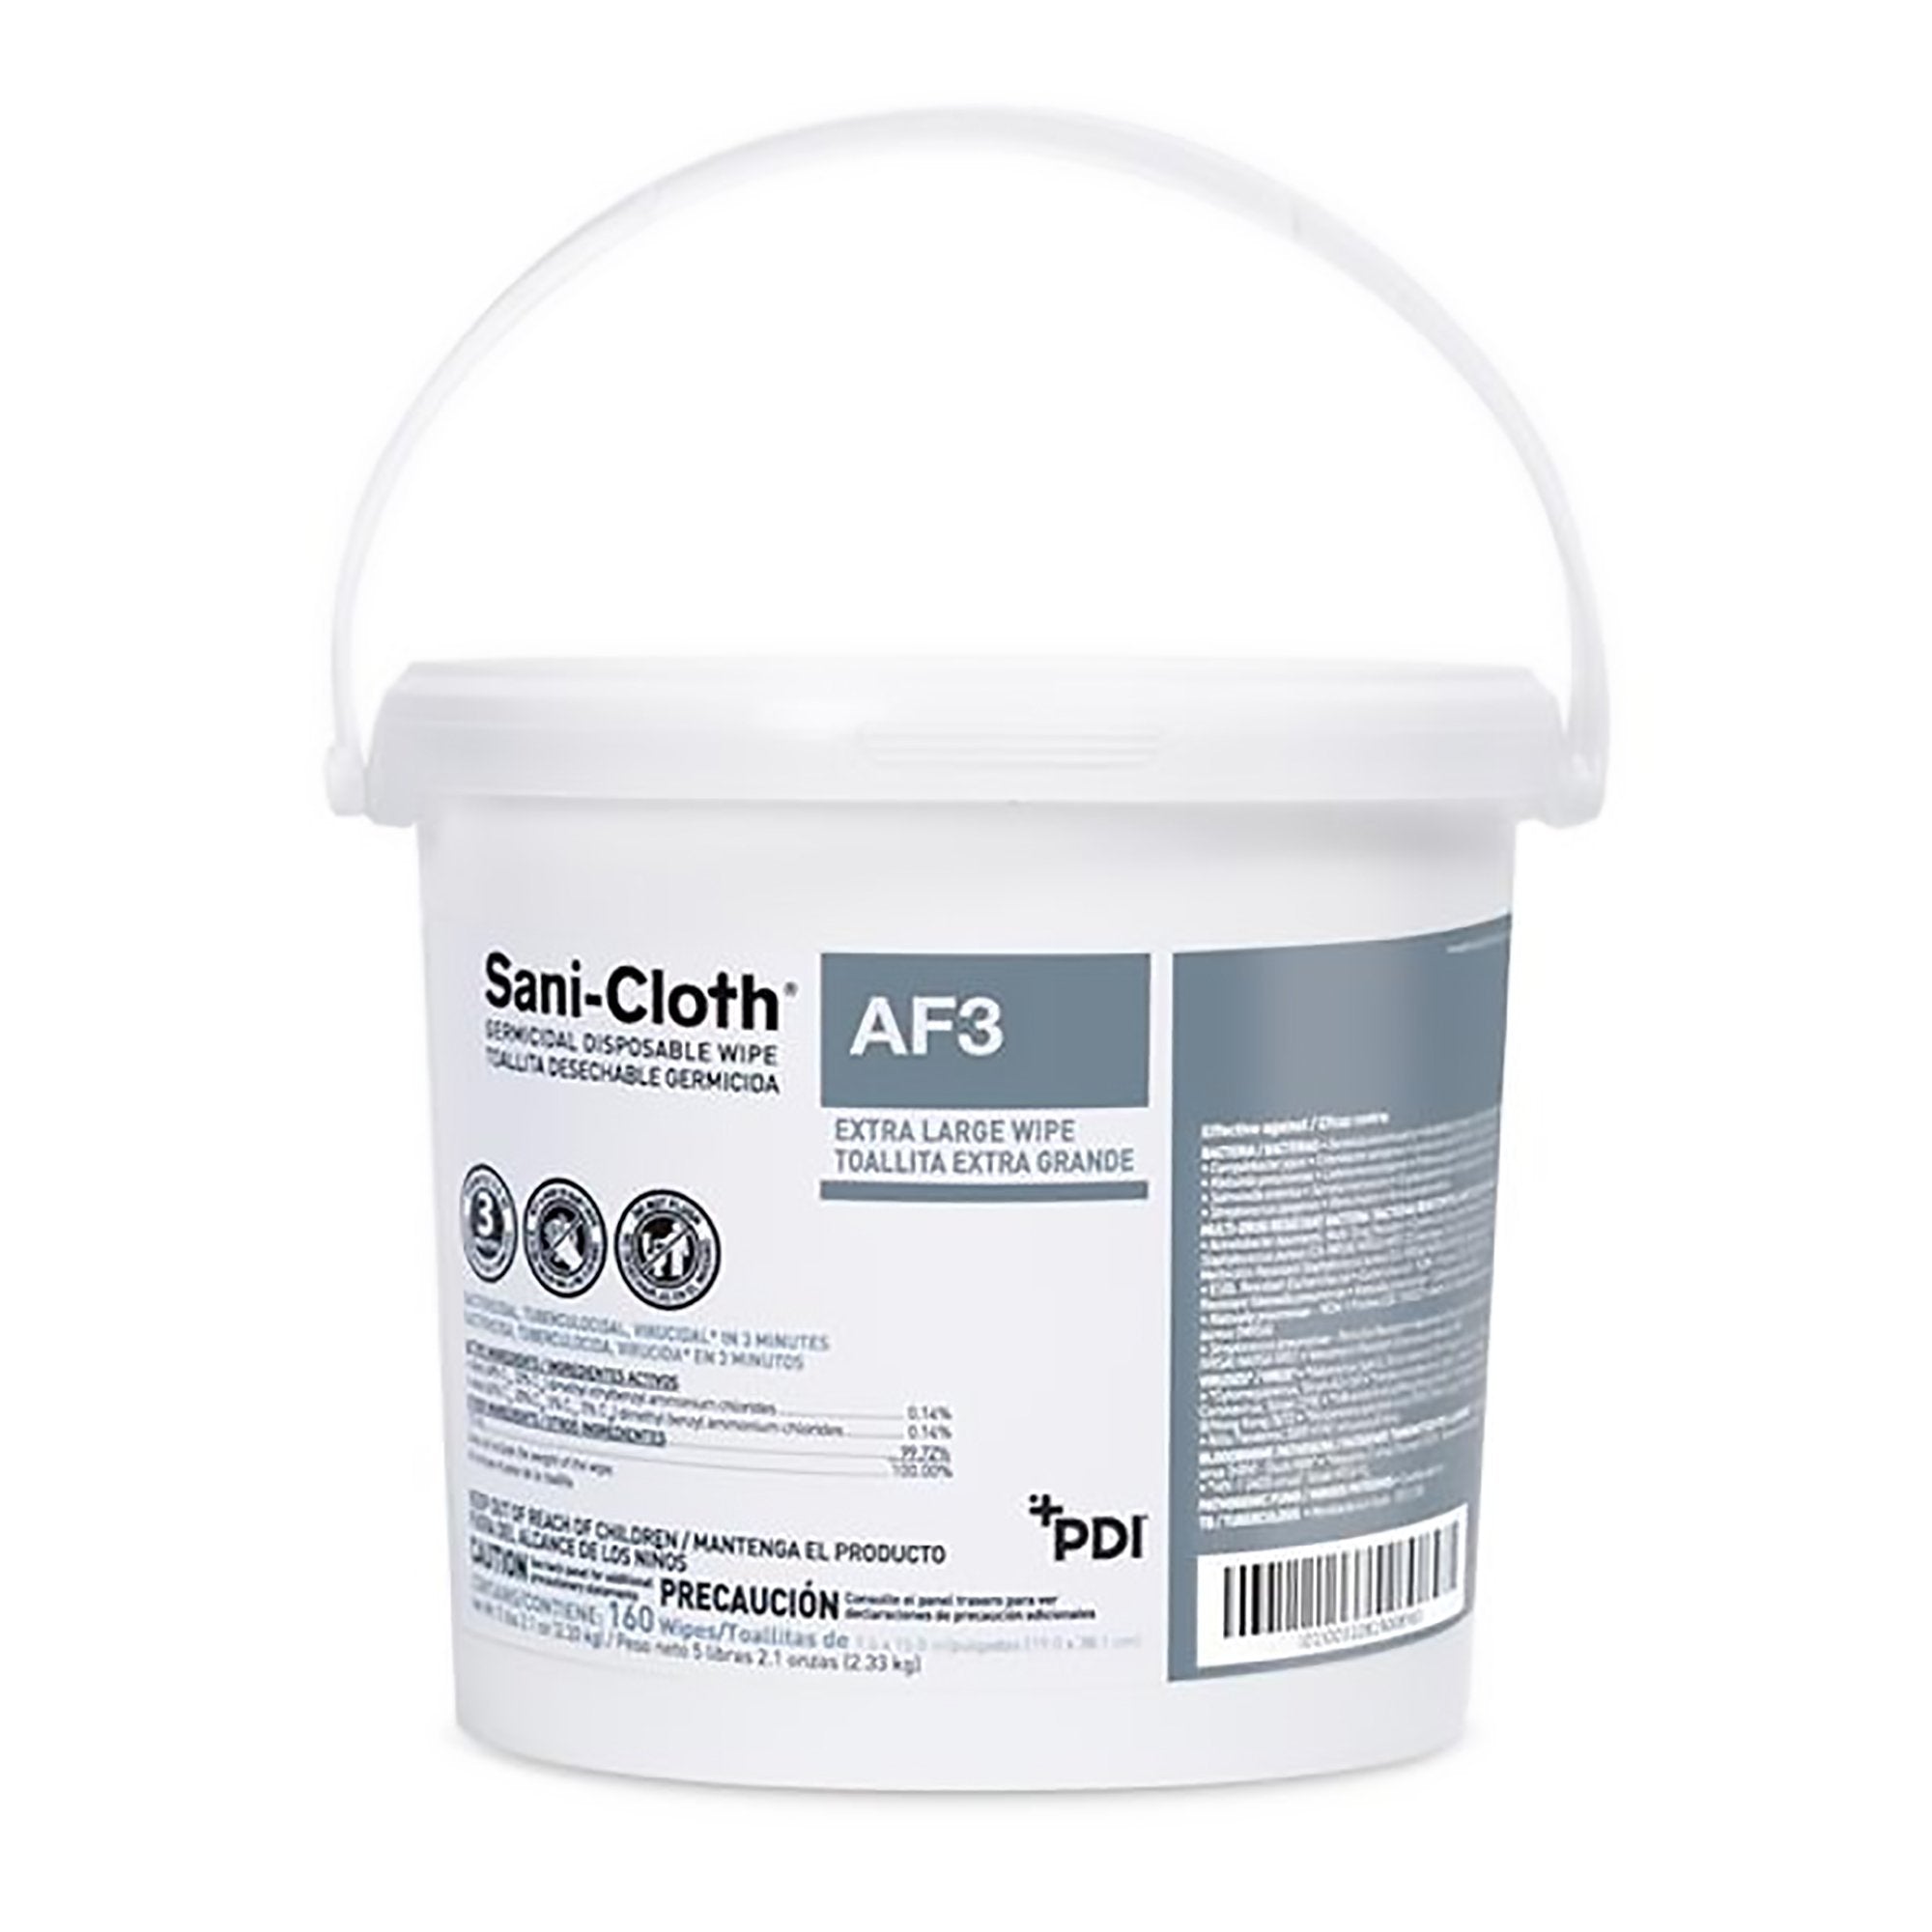 Sani-Cloth® AF3 Surface Disinfectant Cleaner Premoistened Germicidal Manual Pull Wipe 160 Count Pail Mild Scent NonSterile